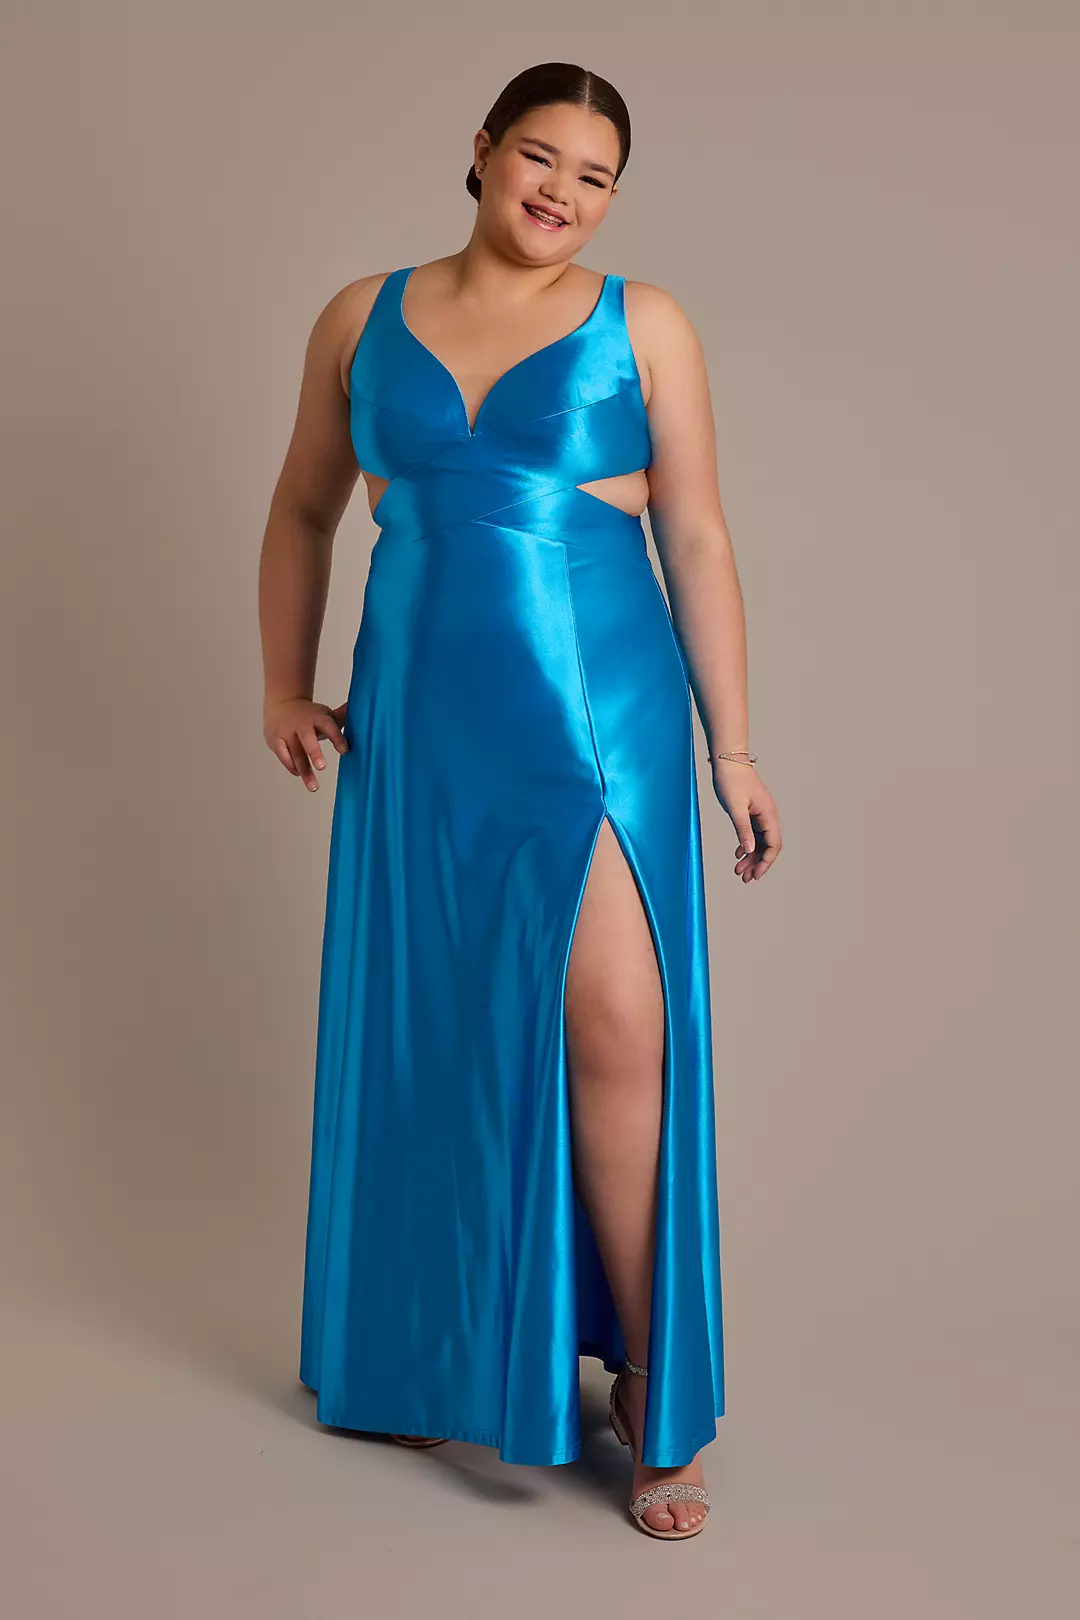 Sculpting Satin A-Line Dress with Side Cutouts Image